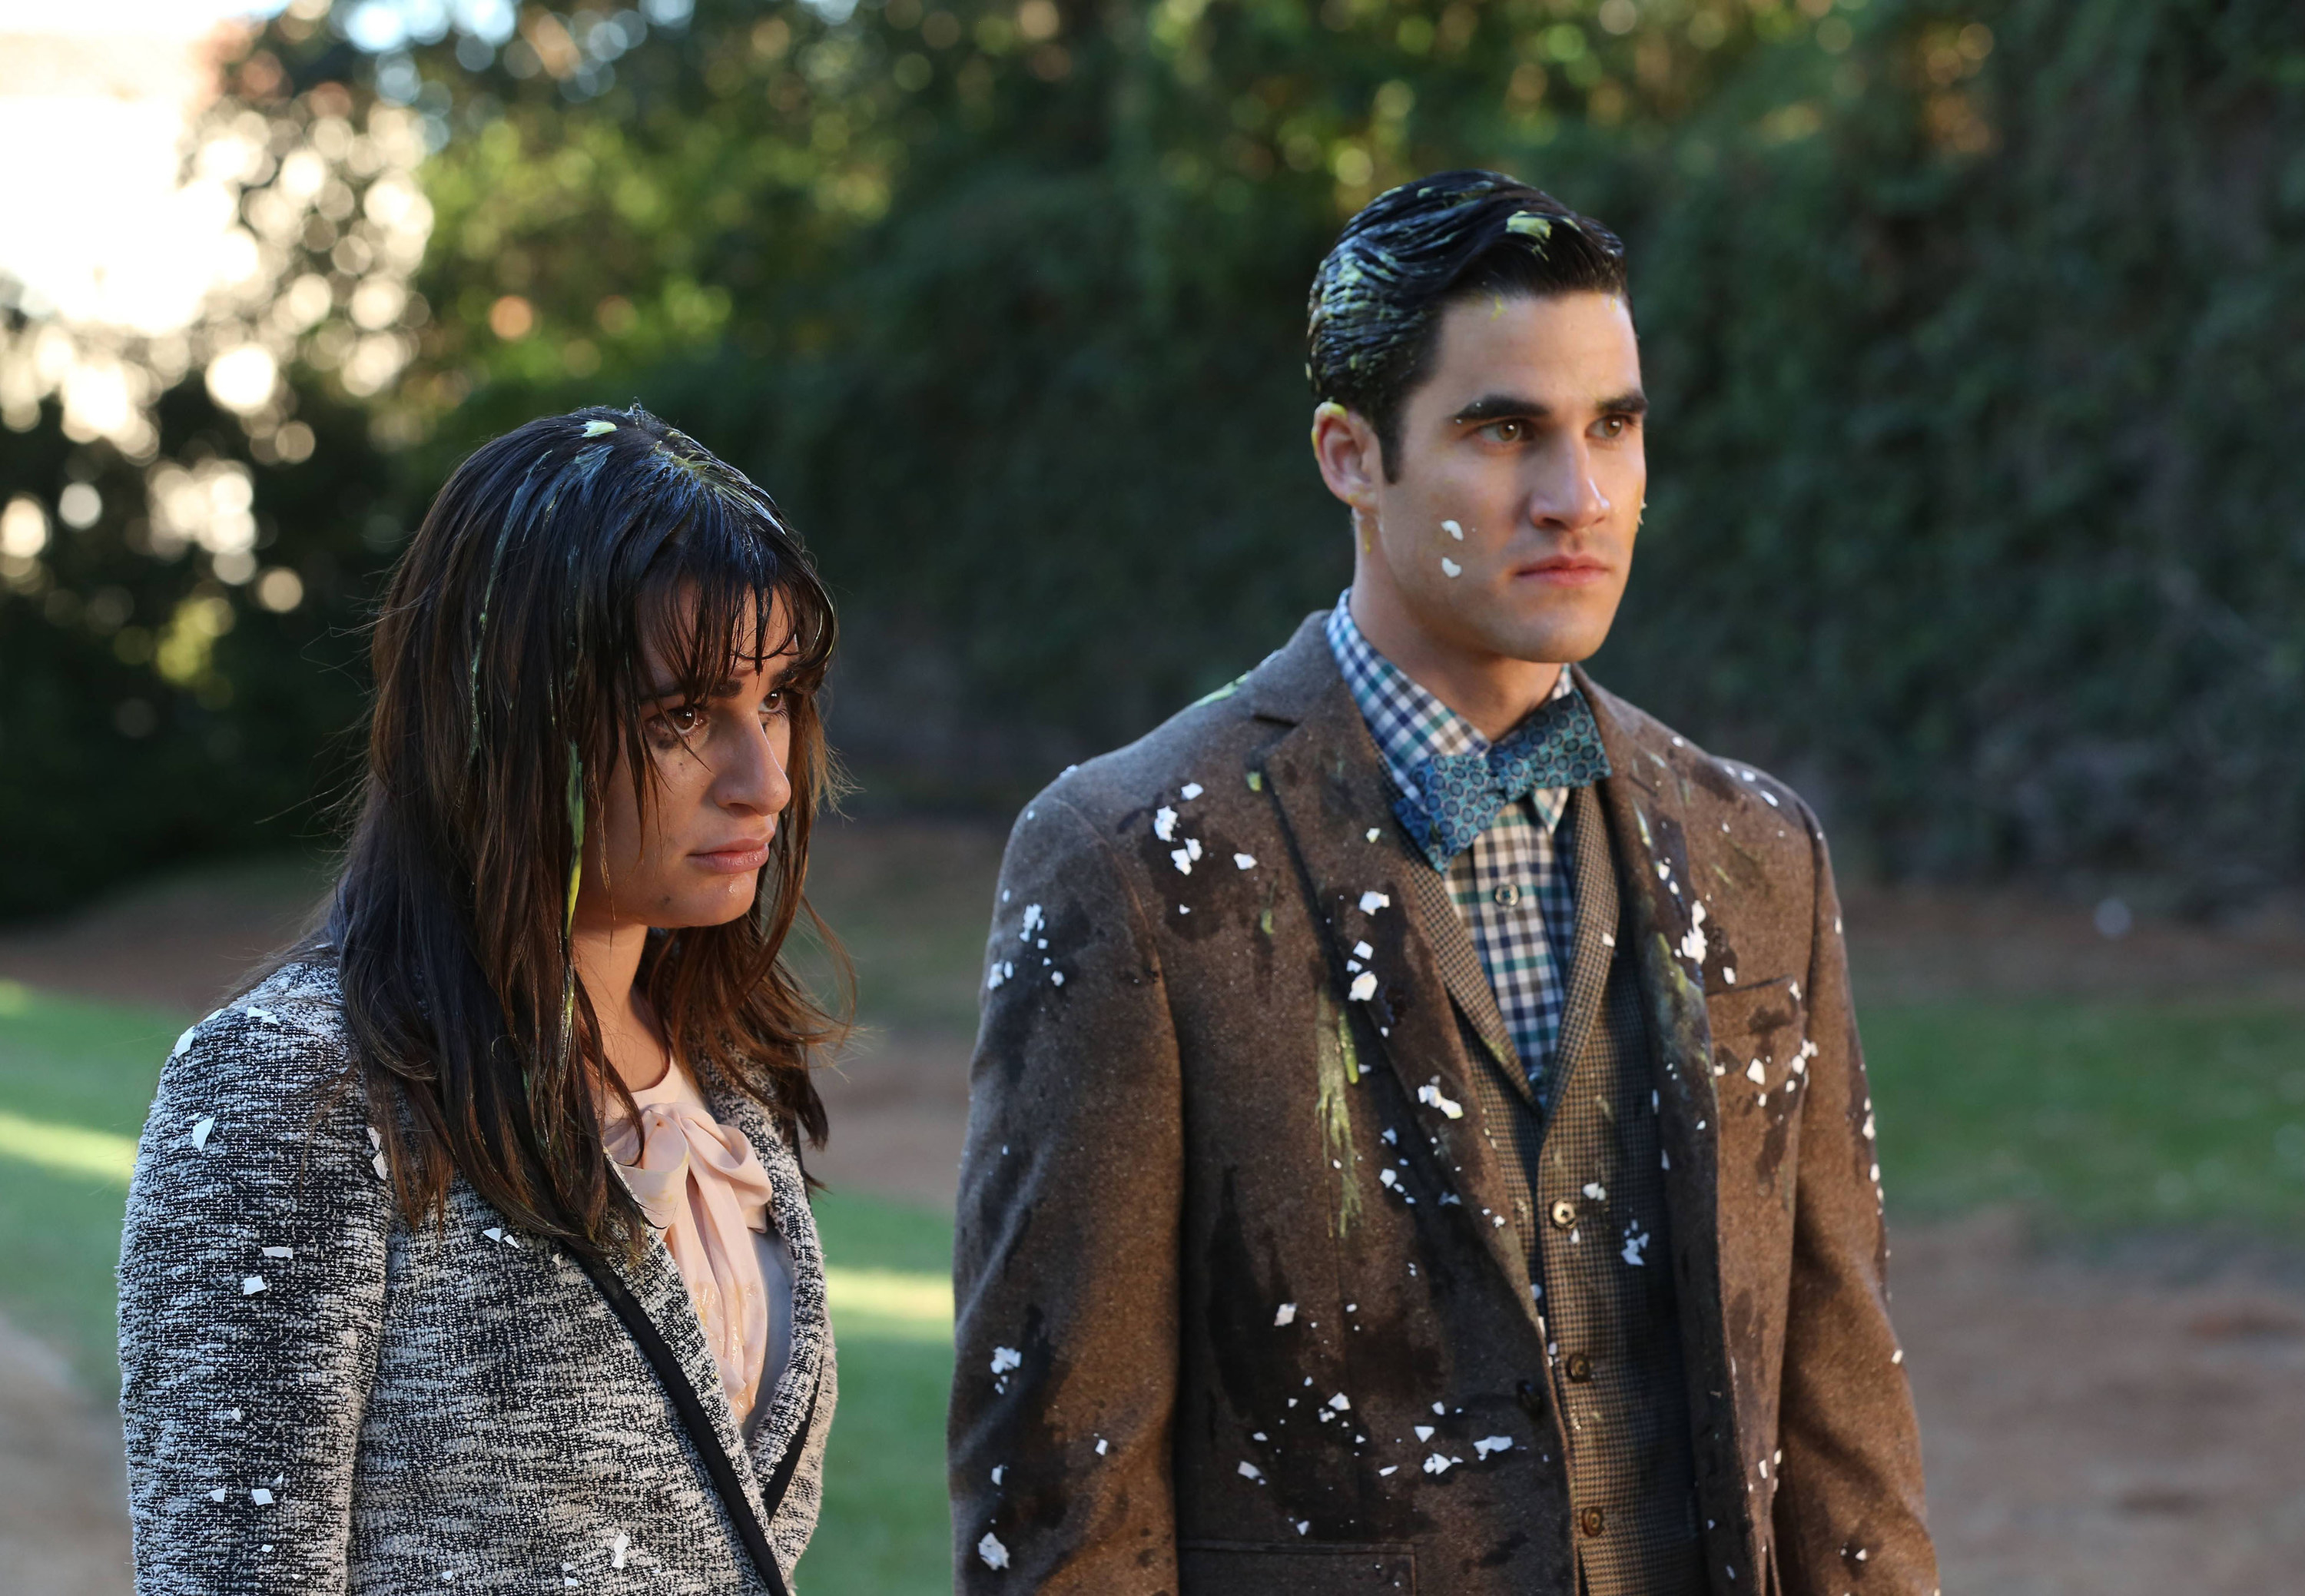 Lea Michele and Criss stand next to each other while covered in slop